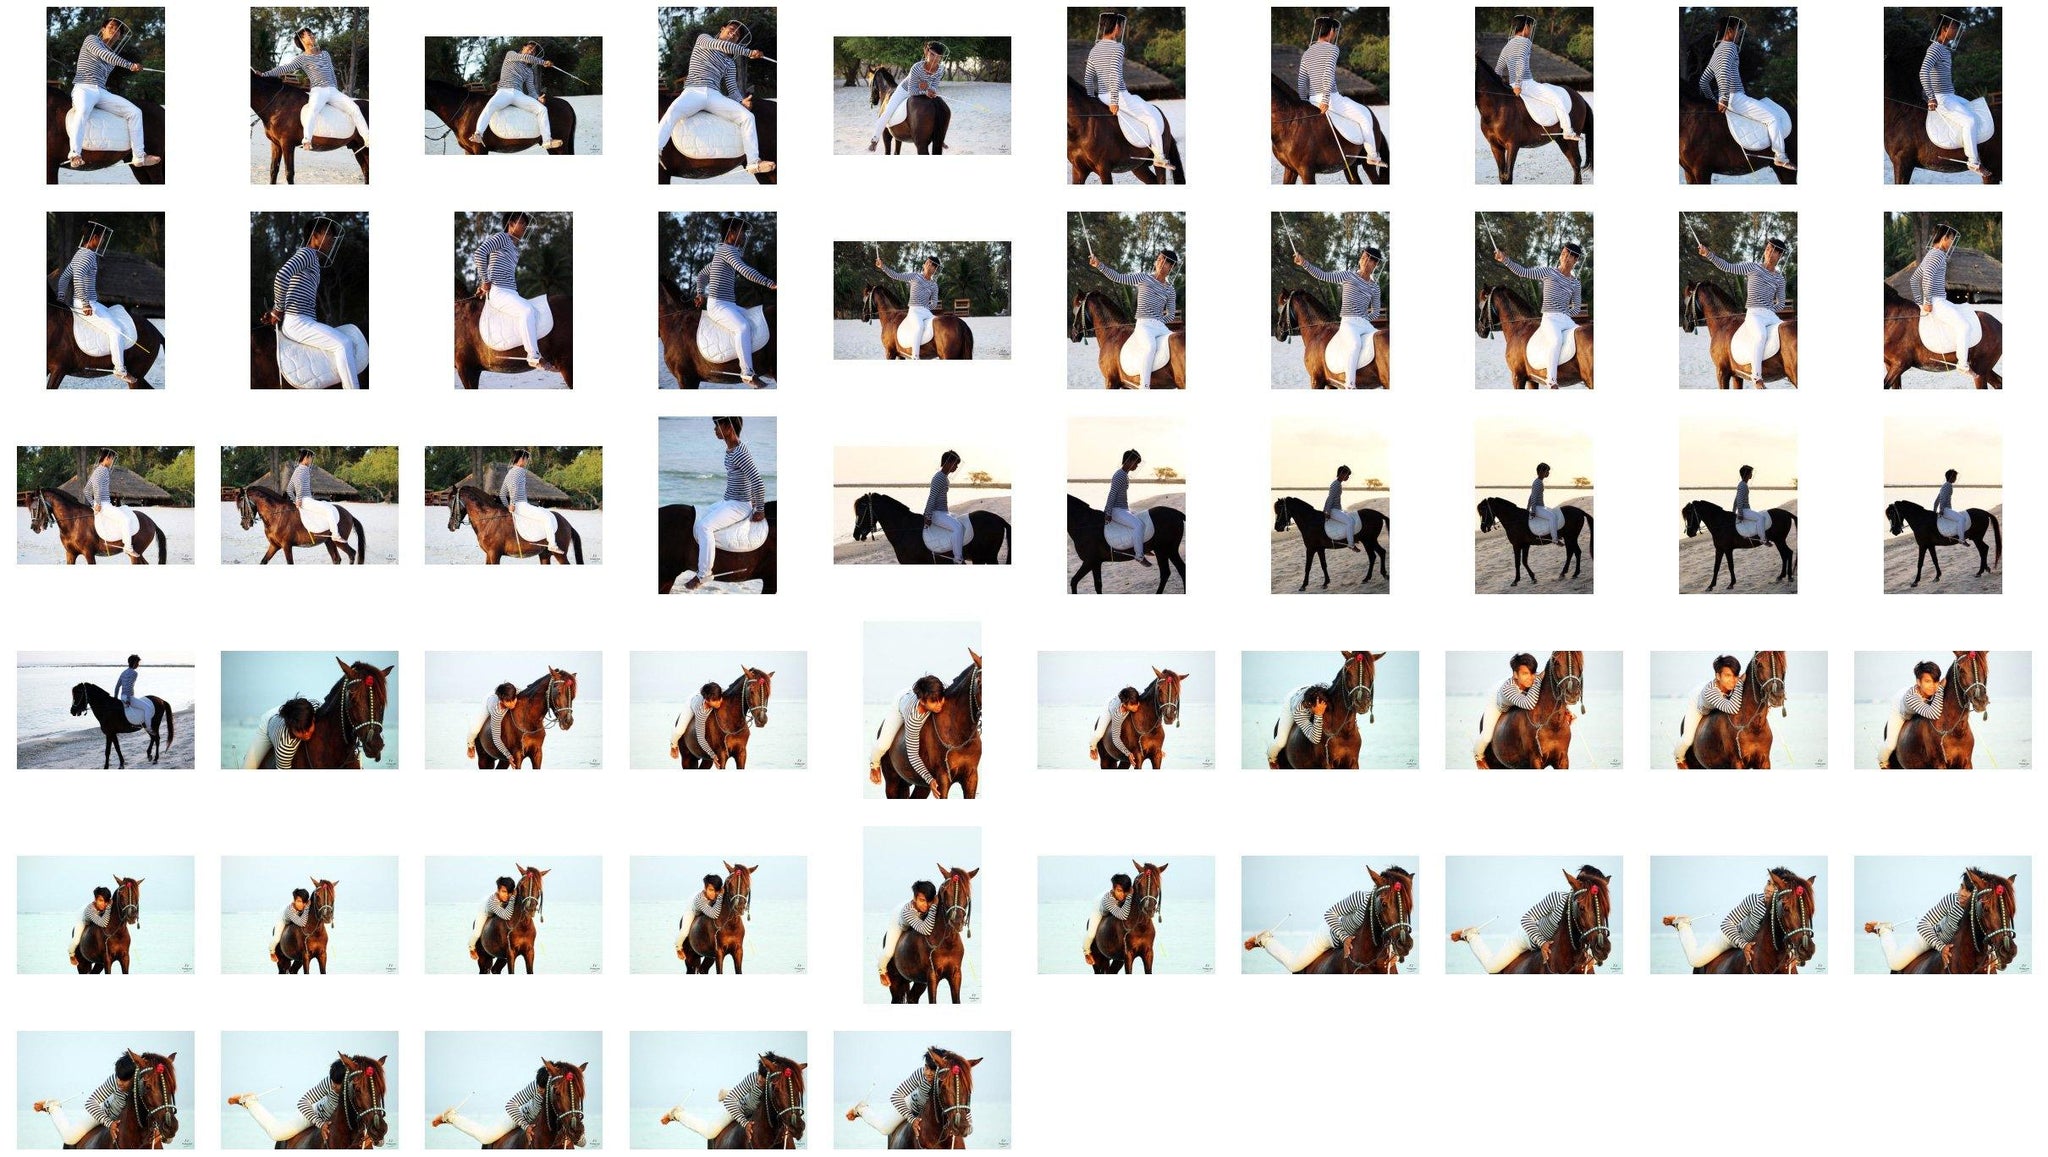 Intan in Striped Shirt and Jodhpurs Acrobating with Wand Bareback on Brown Horse, Part 1 - Riding.Vision